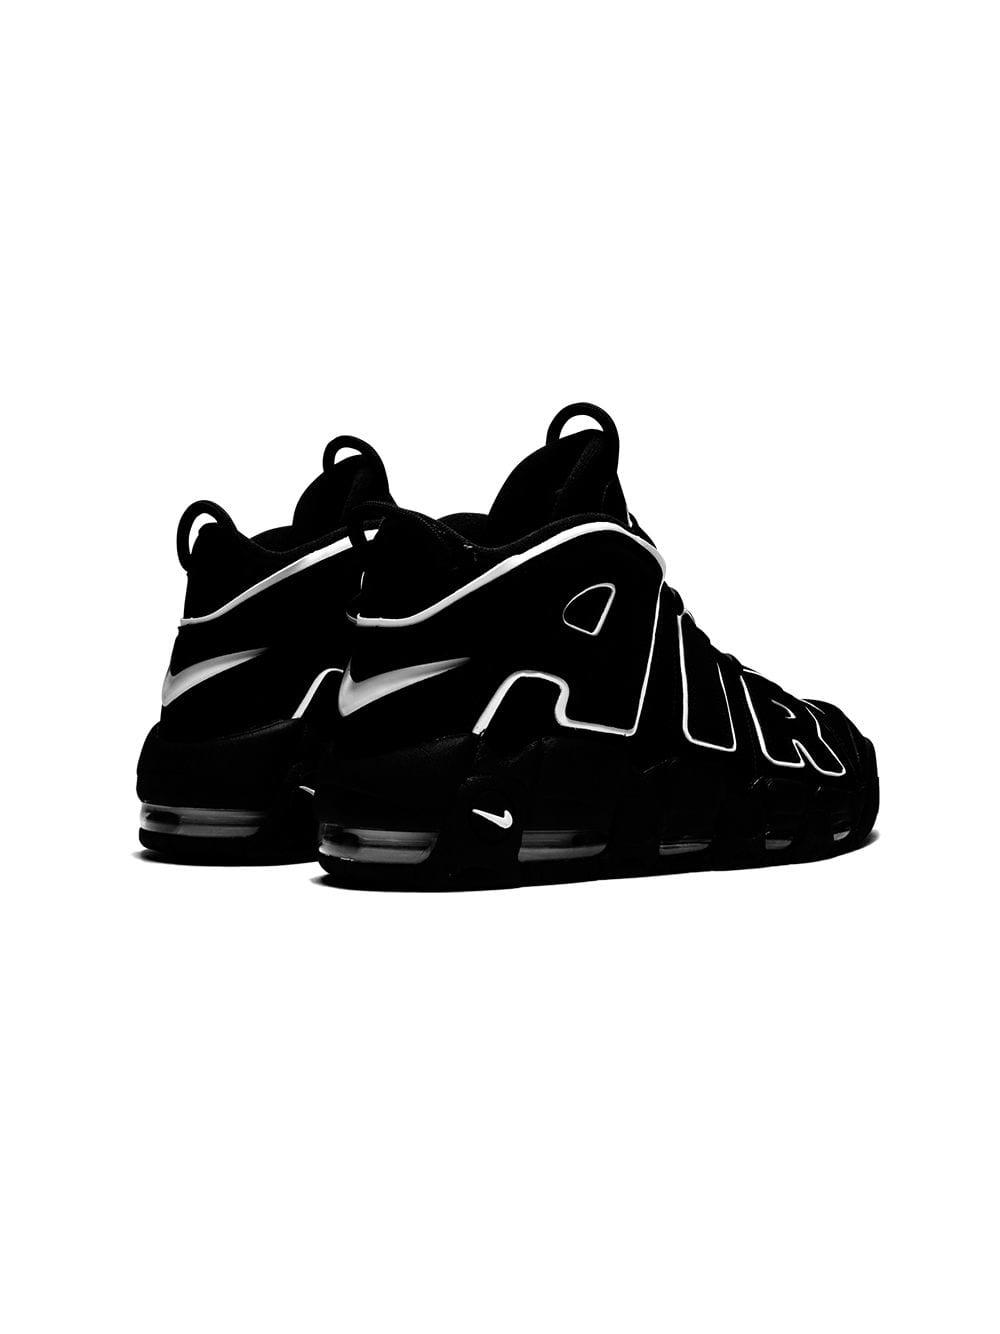 uptempo sneakers